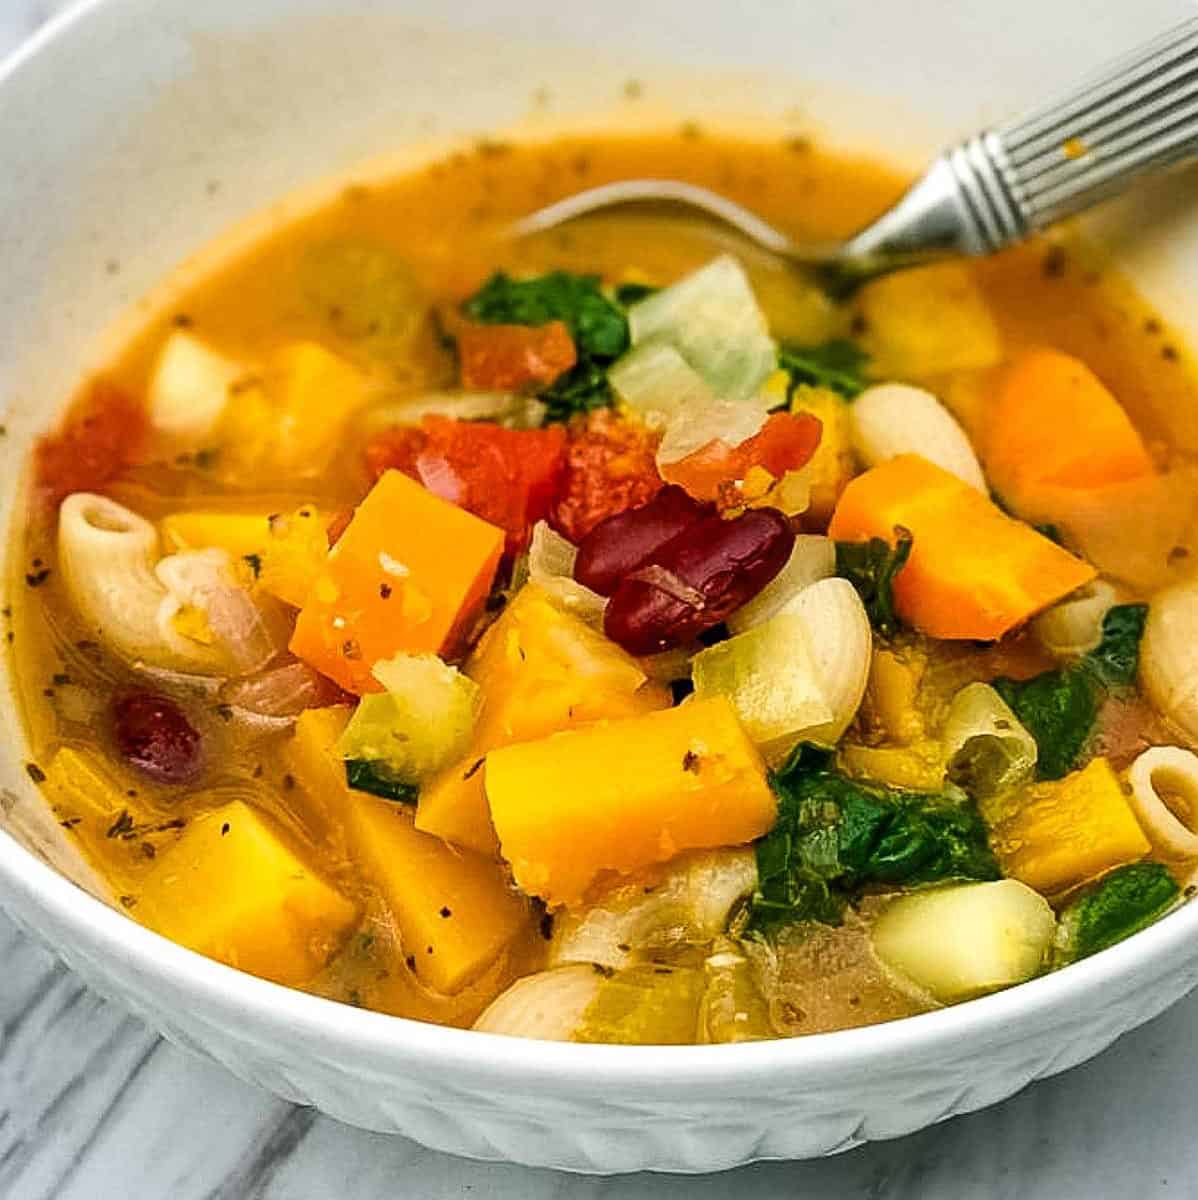  Get ready to fall in love with this autumn-inspired minestrone 🍂